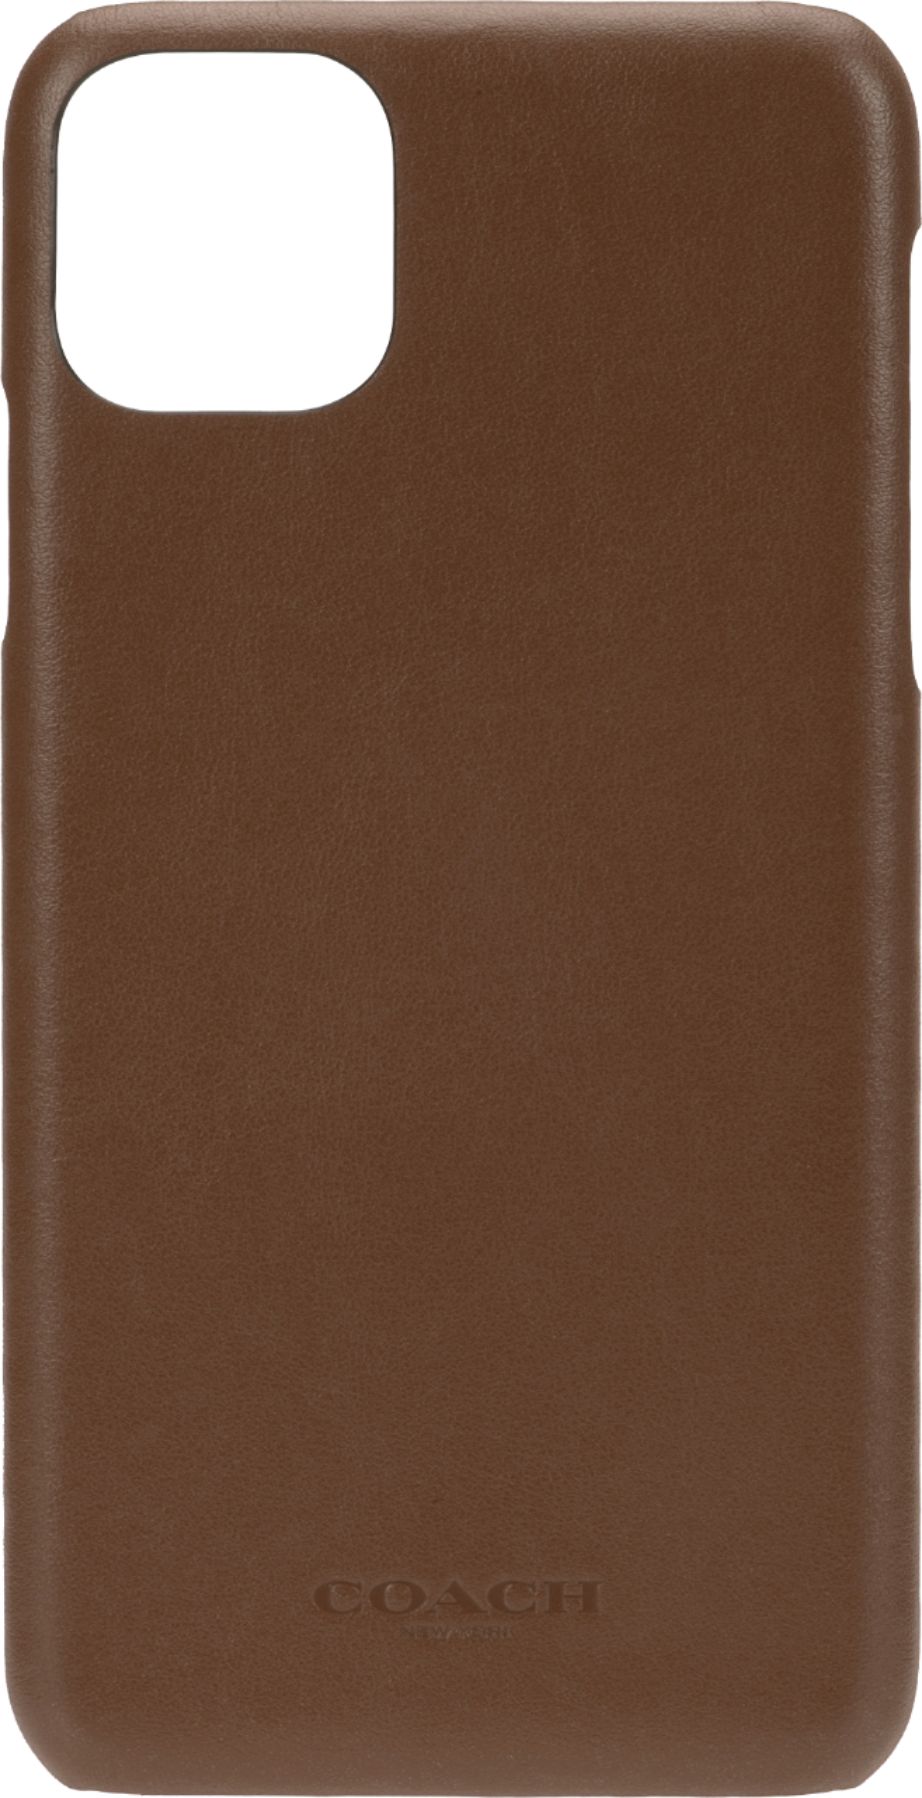 Coach - Leather Slim Protective Case for iPhone 12 Pro...